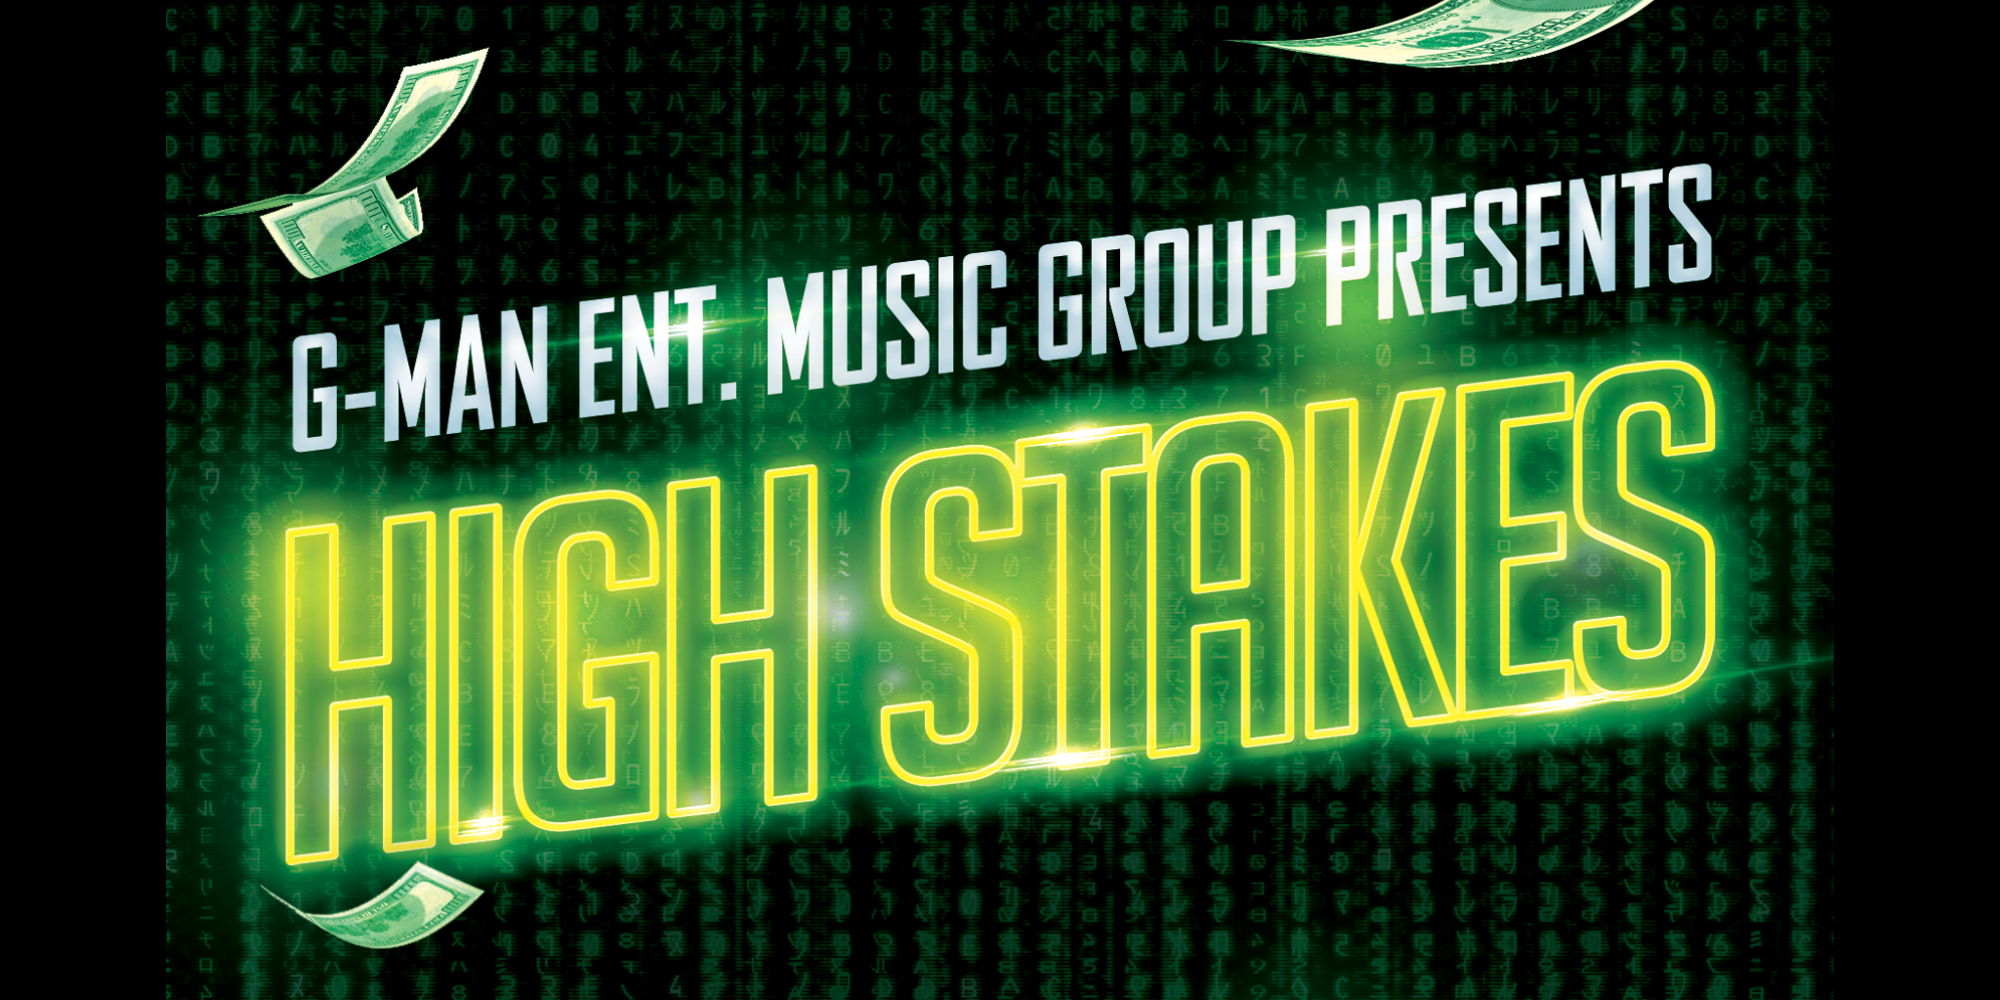 G-Man Ent Music Group Presents High Stakes at Elevation 27 promotional image